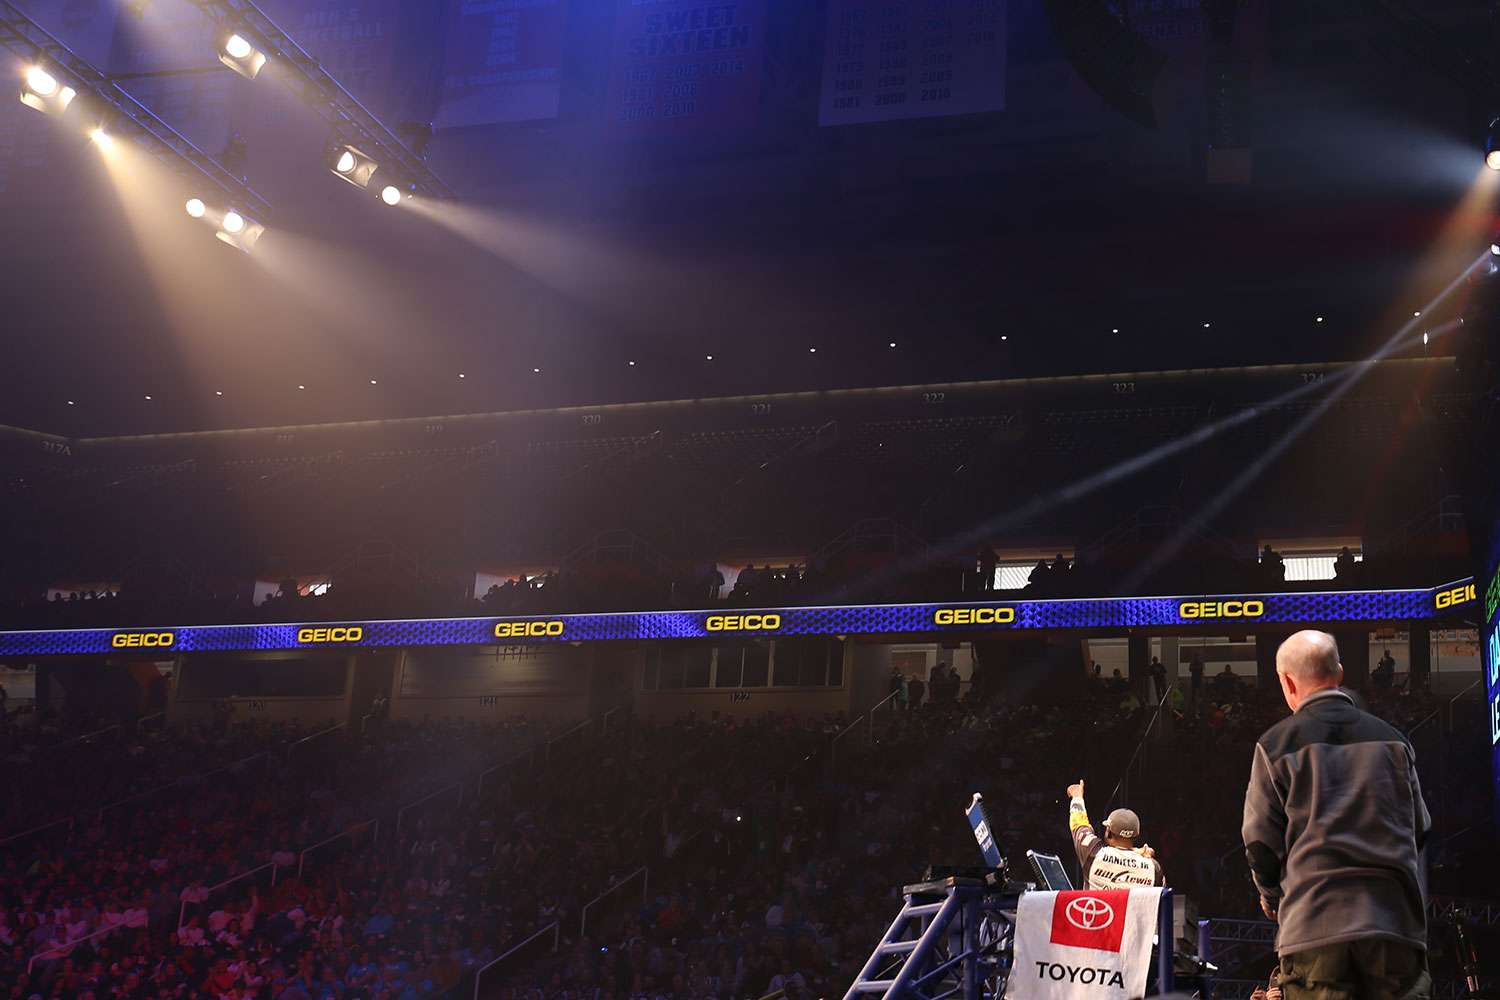 Take a look at the massive crowd within the Thompson-Boling Arena on second day of the 2019 GEICO Bassmaster Classic presented by DICK'S Sporting Goods.